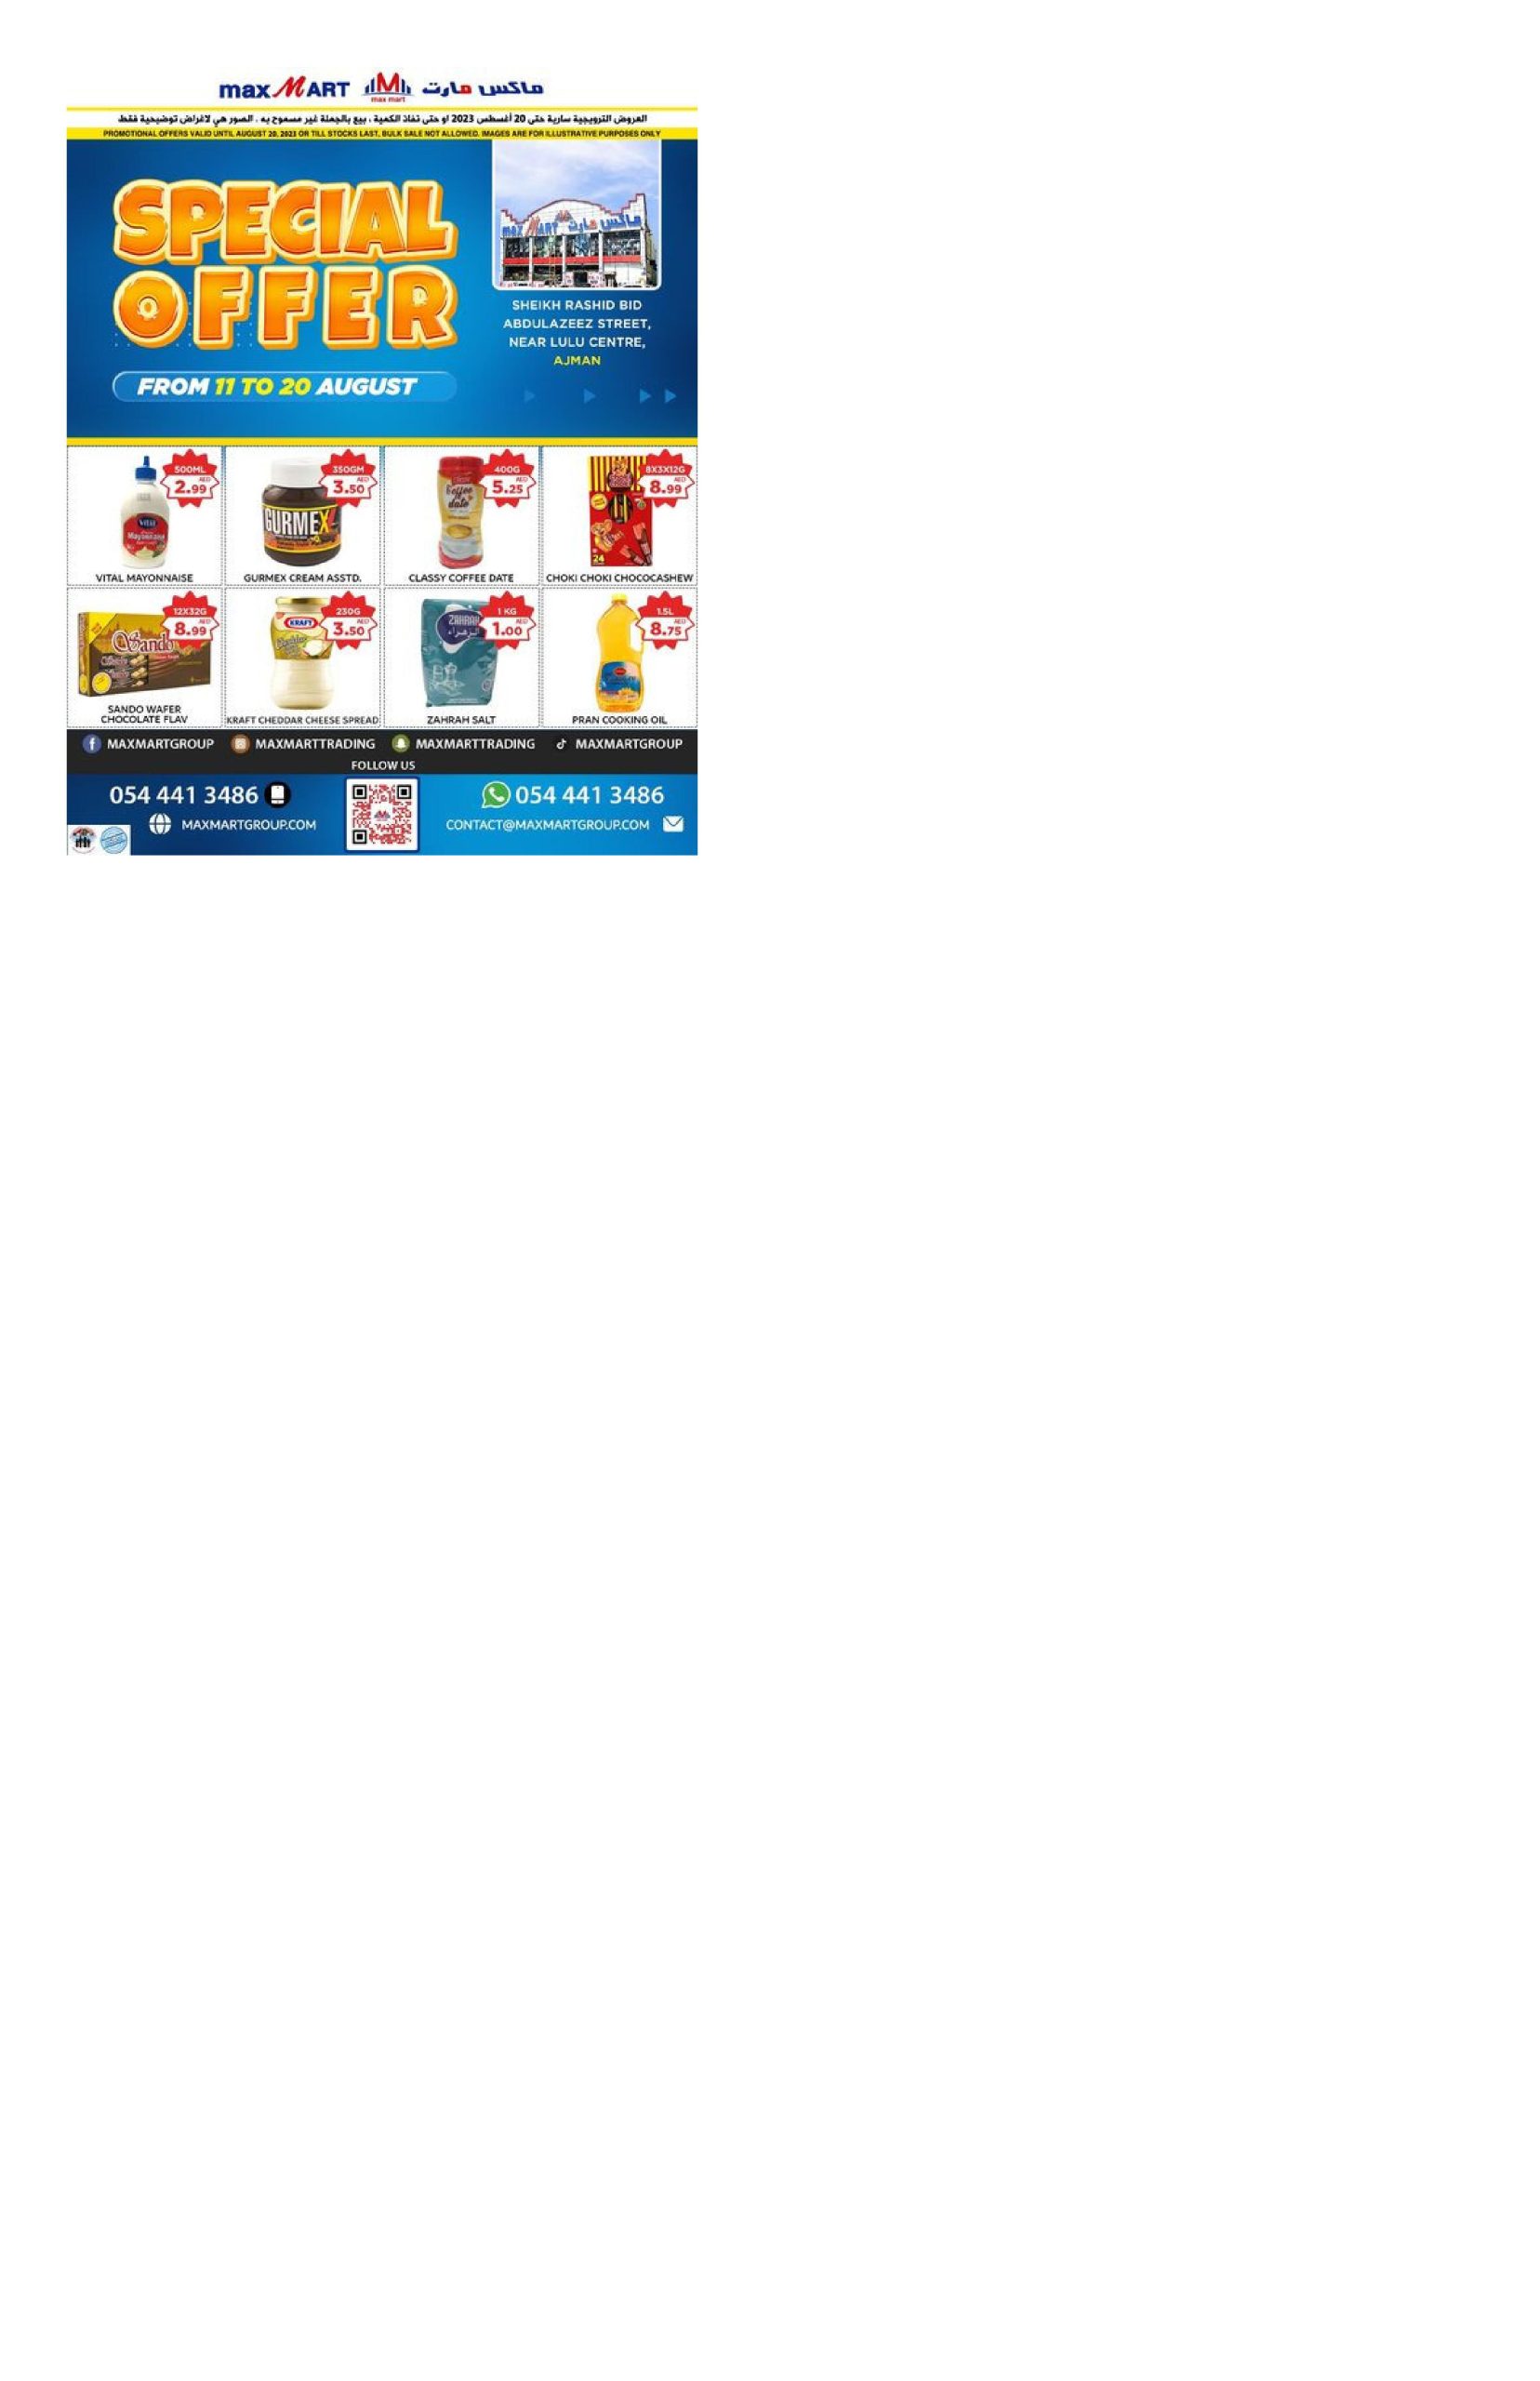 Max Mart Offers Catalog